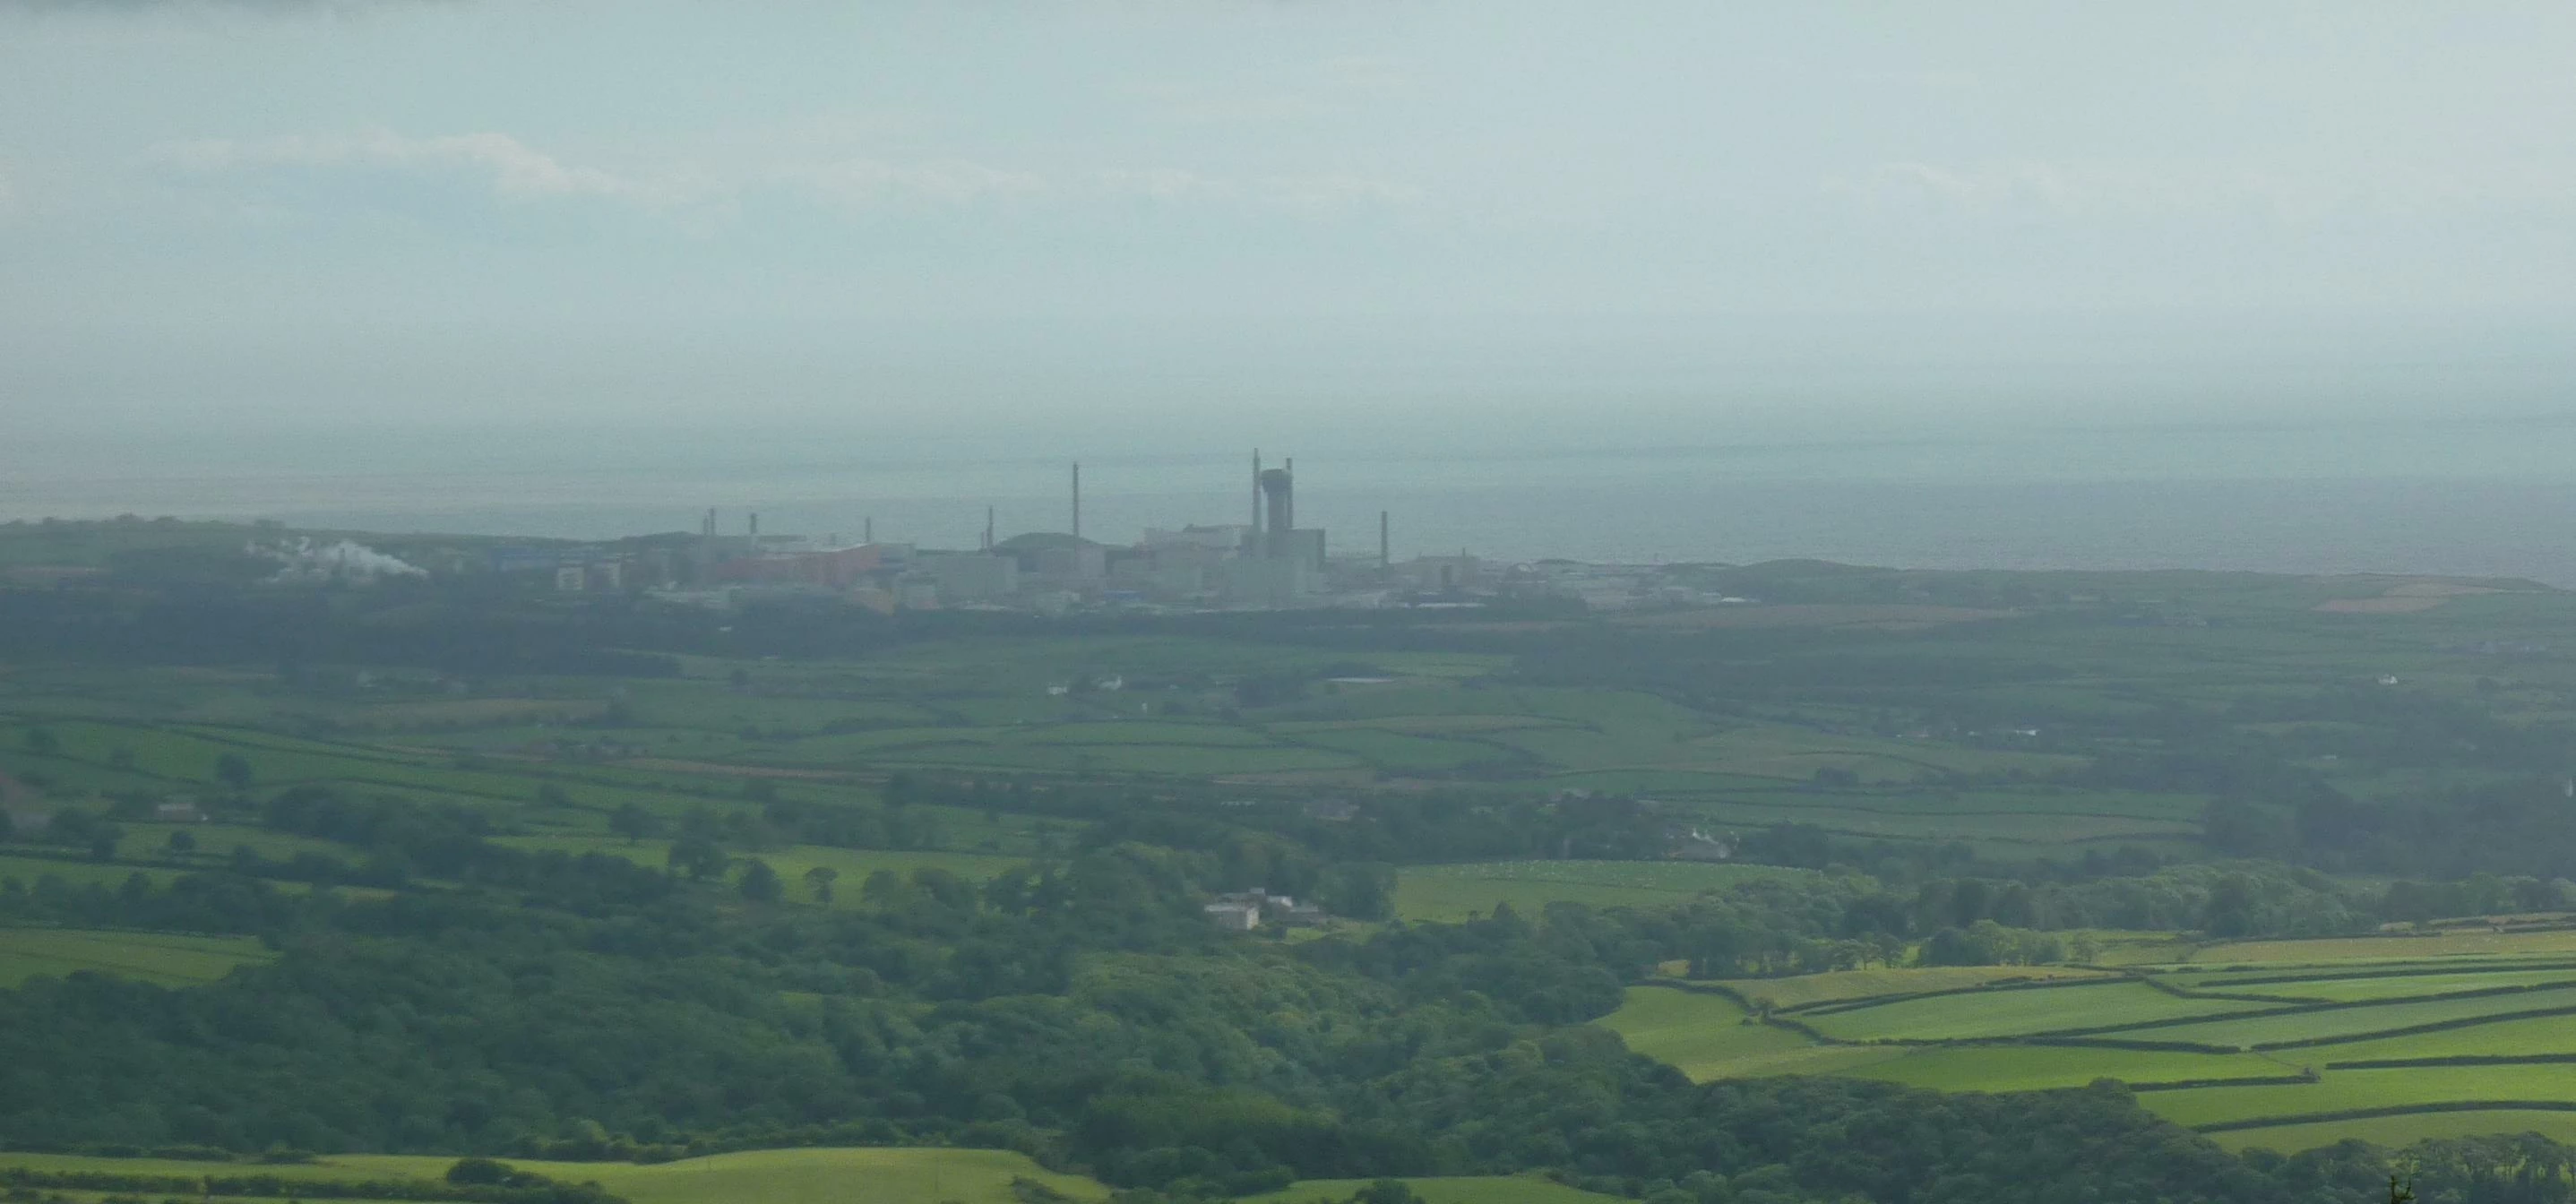 Sellafield in the distance